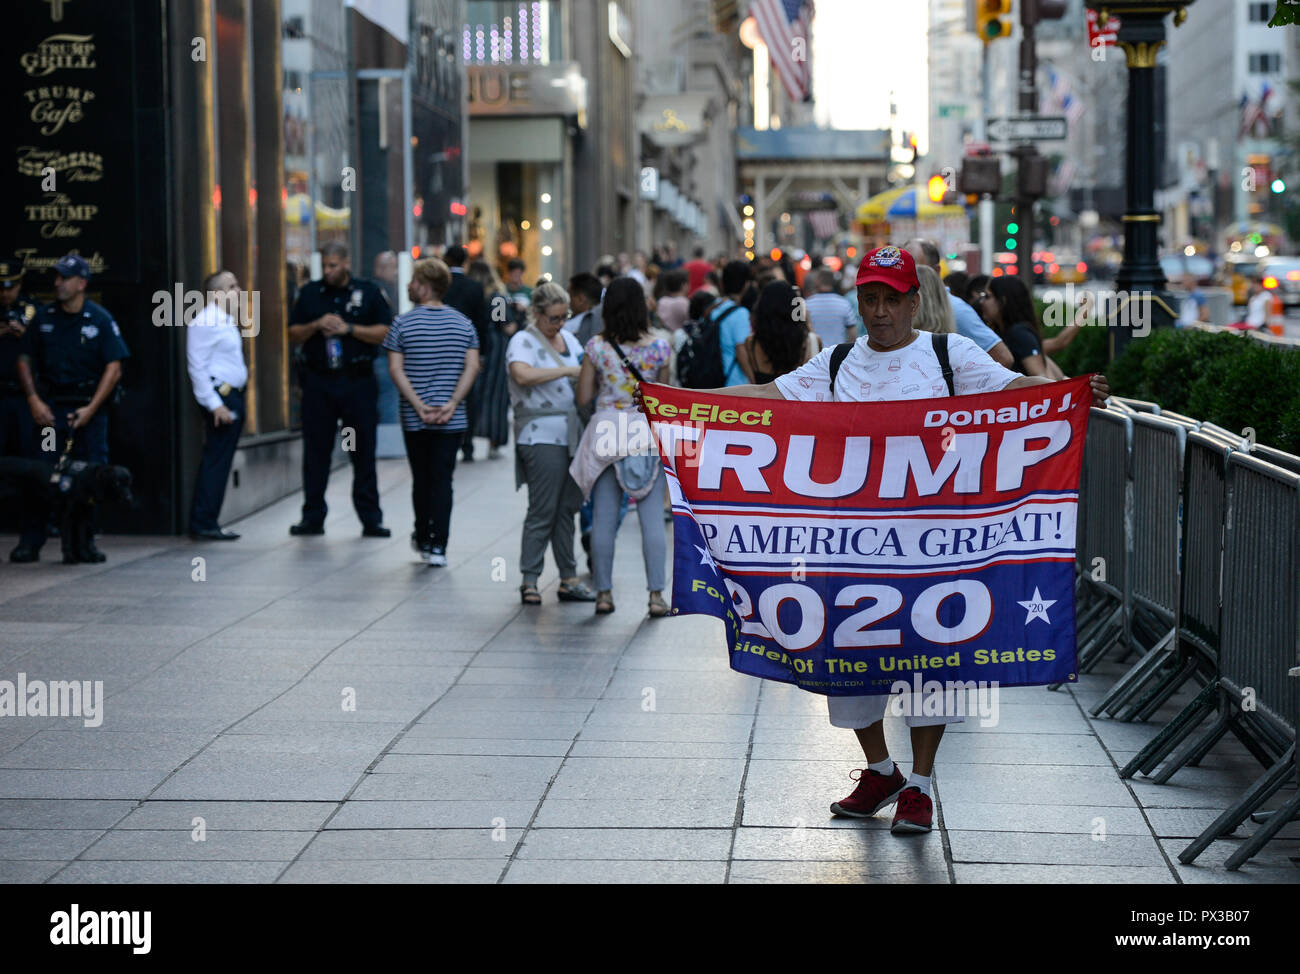 USA, New York City, Donald Trump supporter with banner for re-election of Trump for president  in 2020 in front of Trump tower at 5th Avenue , his slogan: TRUMP keep America great ! / Trump Befuerworter mit Wiederwahl 2020 Plakat vor dem Trump Tower , sein slogan Keep America great! Stock Photo